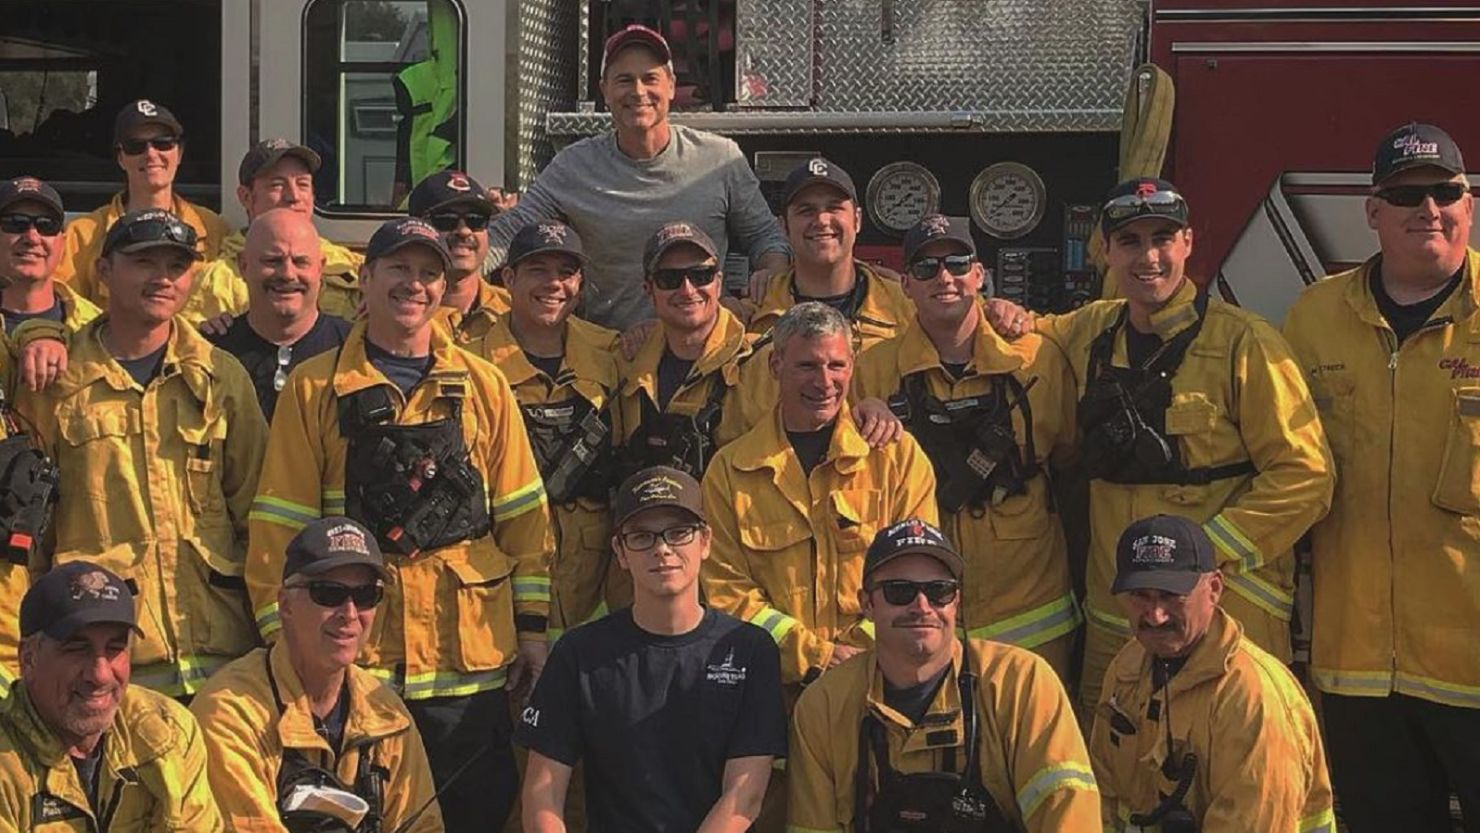 Rob Lowe served a home-cooked meal to the firefighters working to battle the raging Thomas Fire blazes that had been moving closer to his home, the actor posted on Instagram.